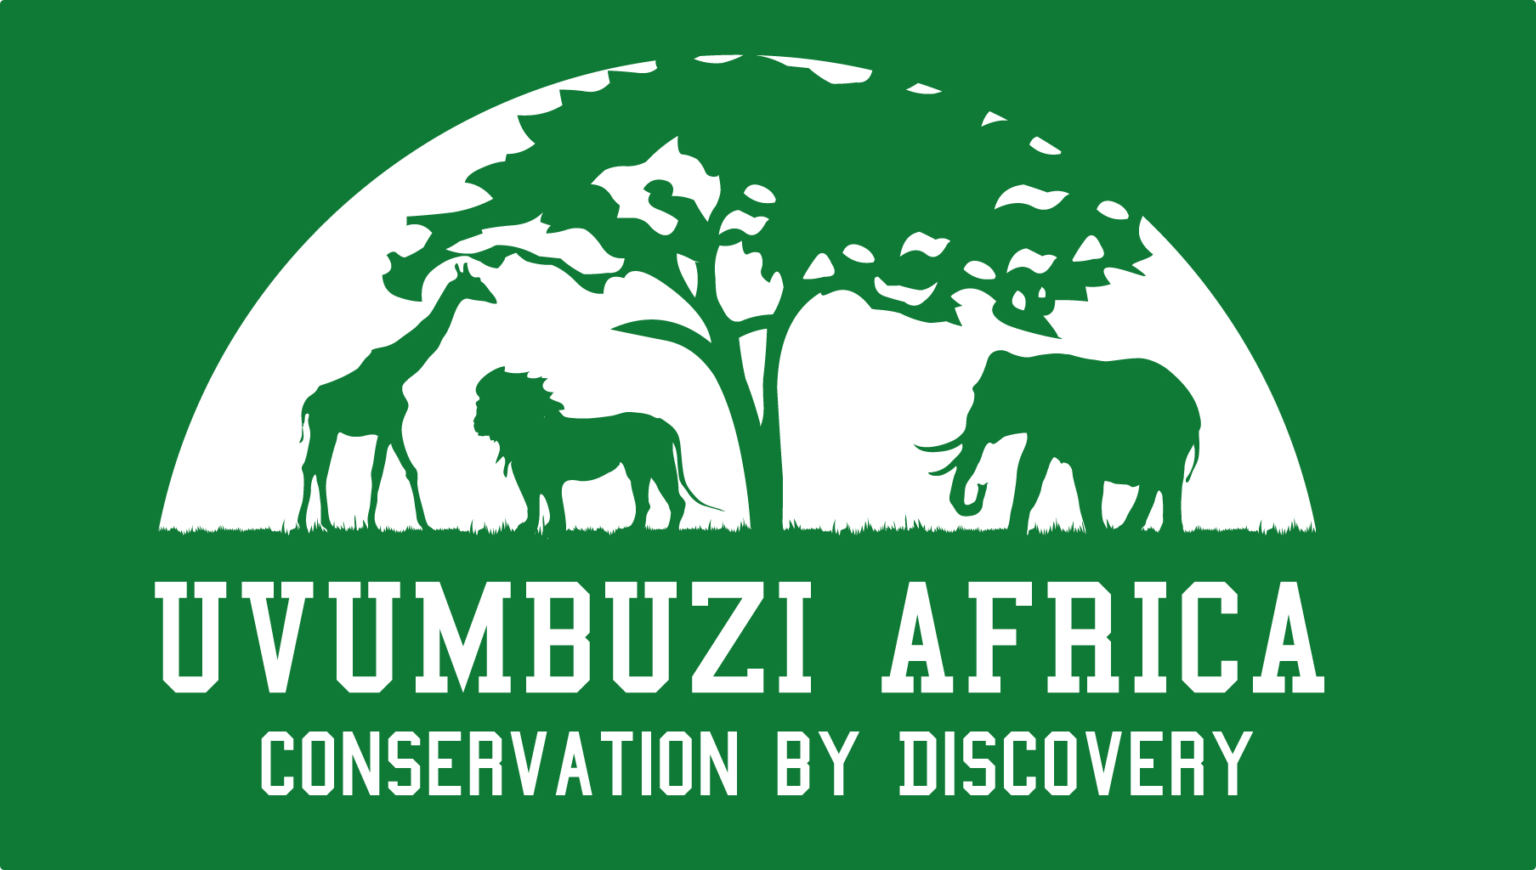 Conservation by Discovery of Wildlife and Environment - Uvumbuzi